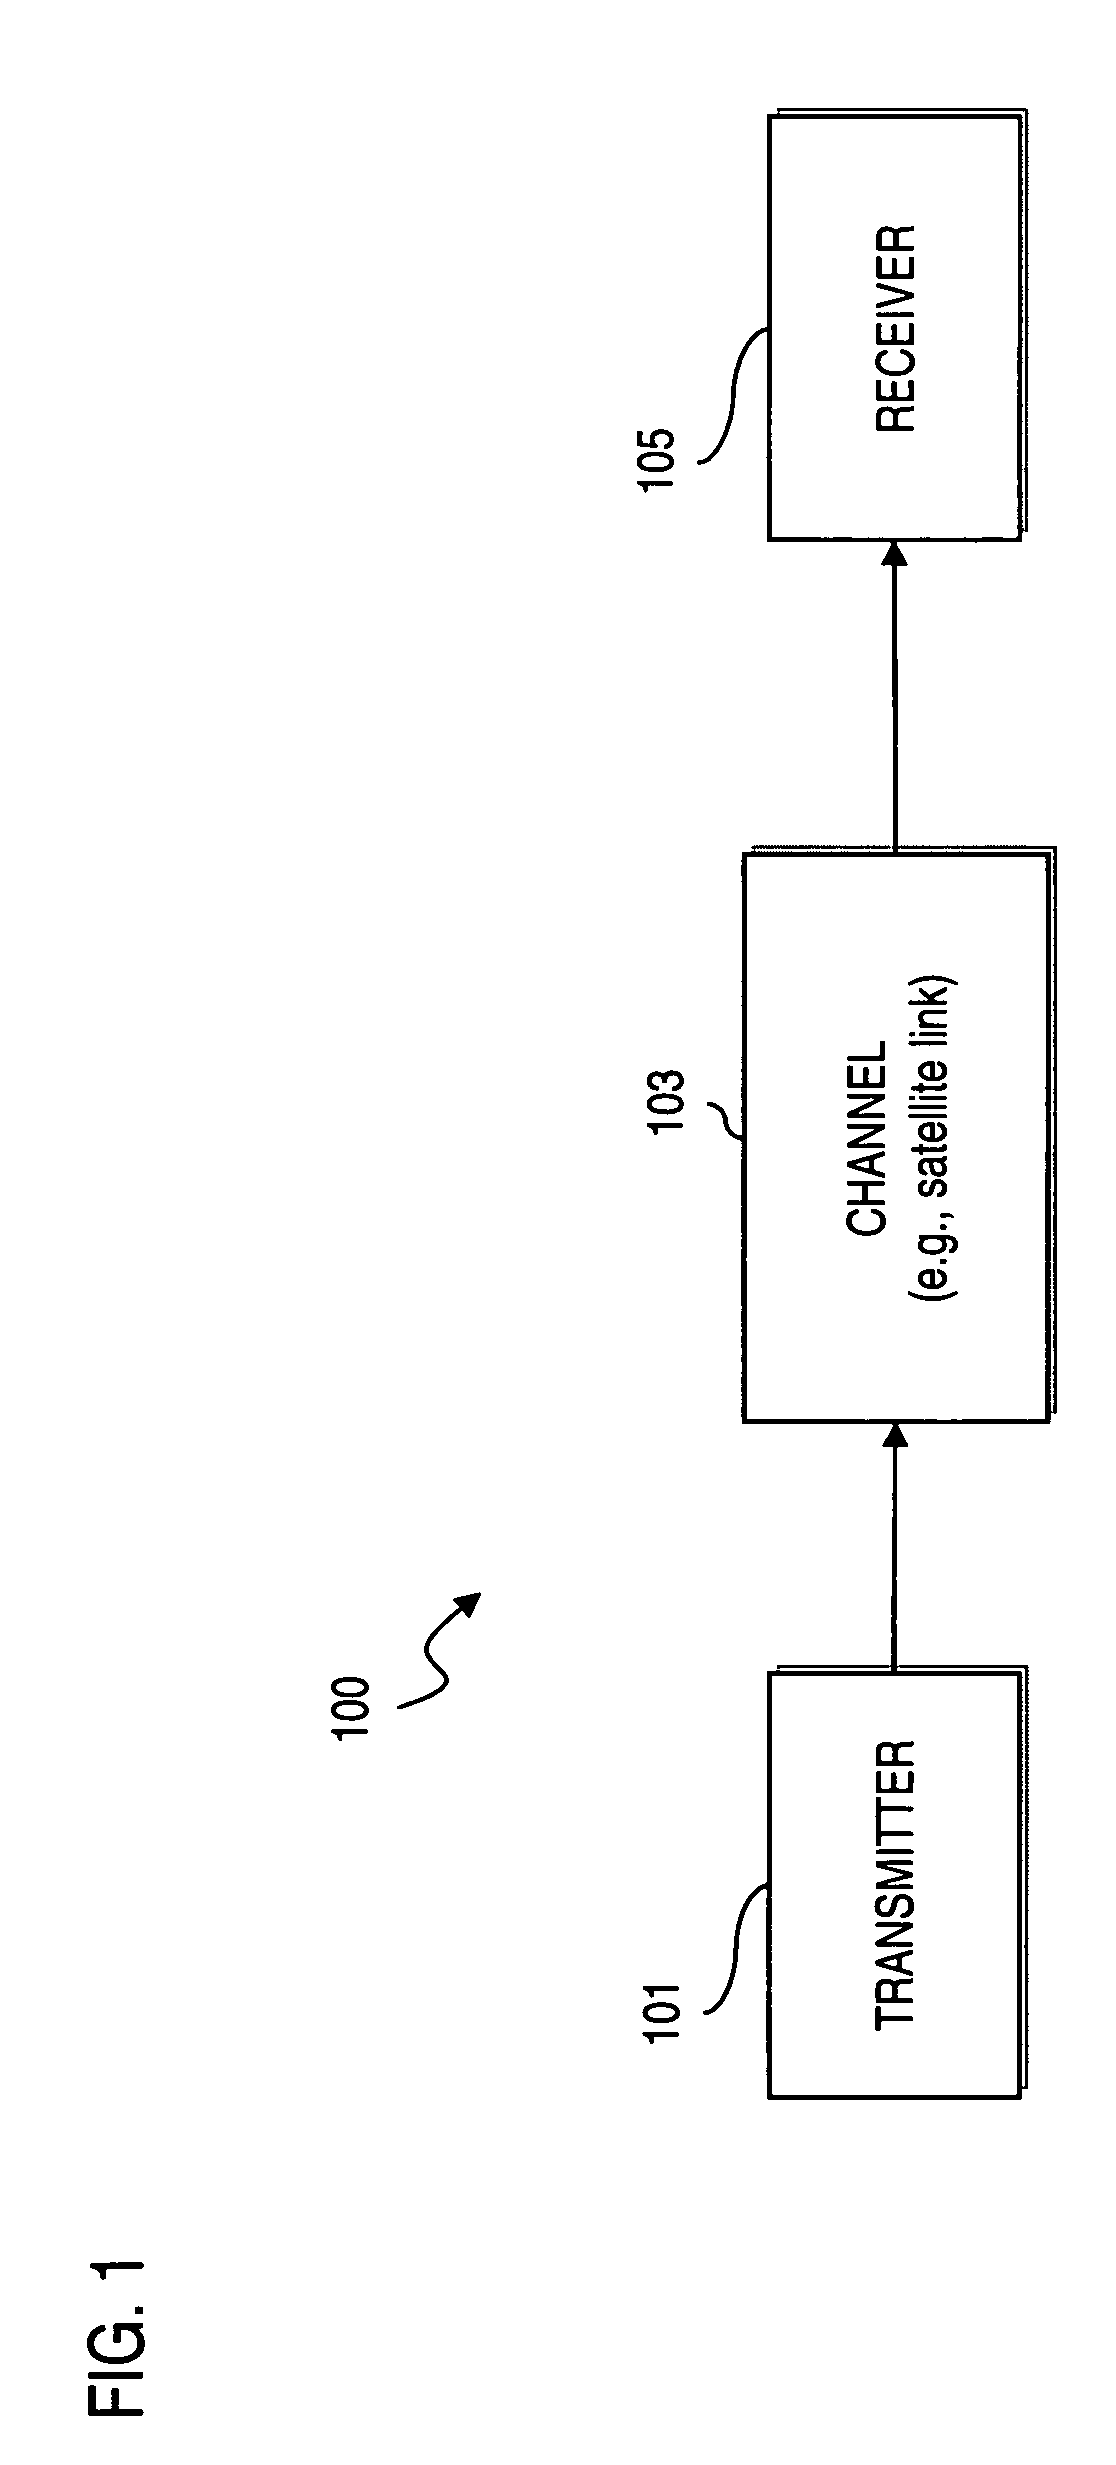 Method and apparatus for providing reduced memory low density parity check (LDPC) codes